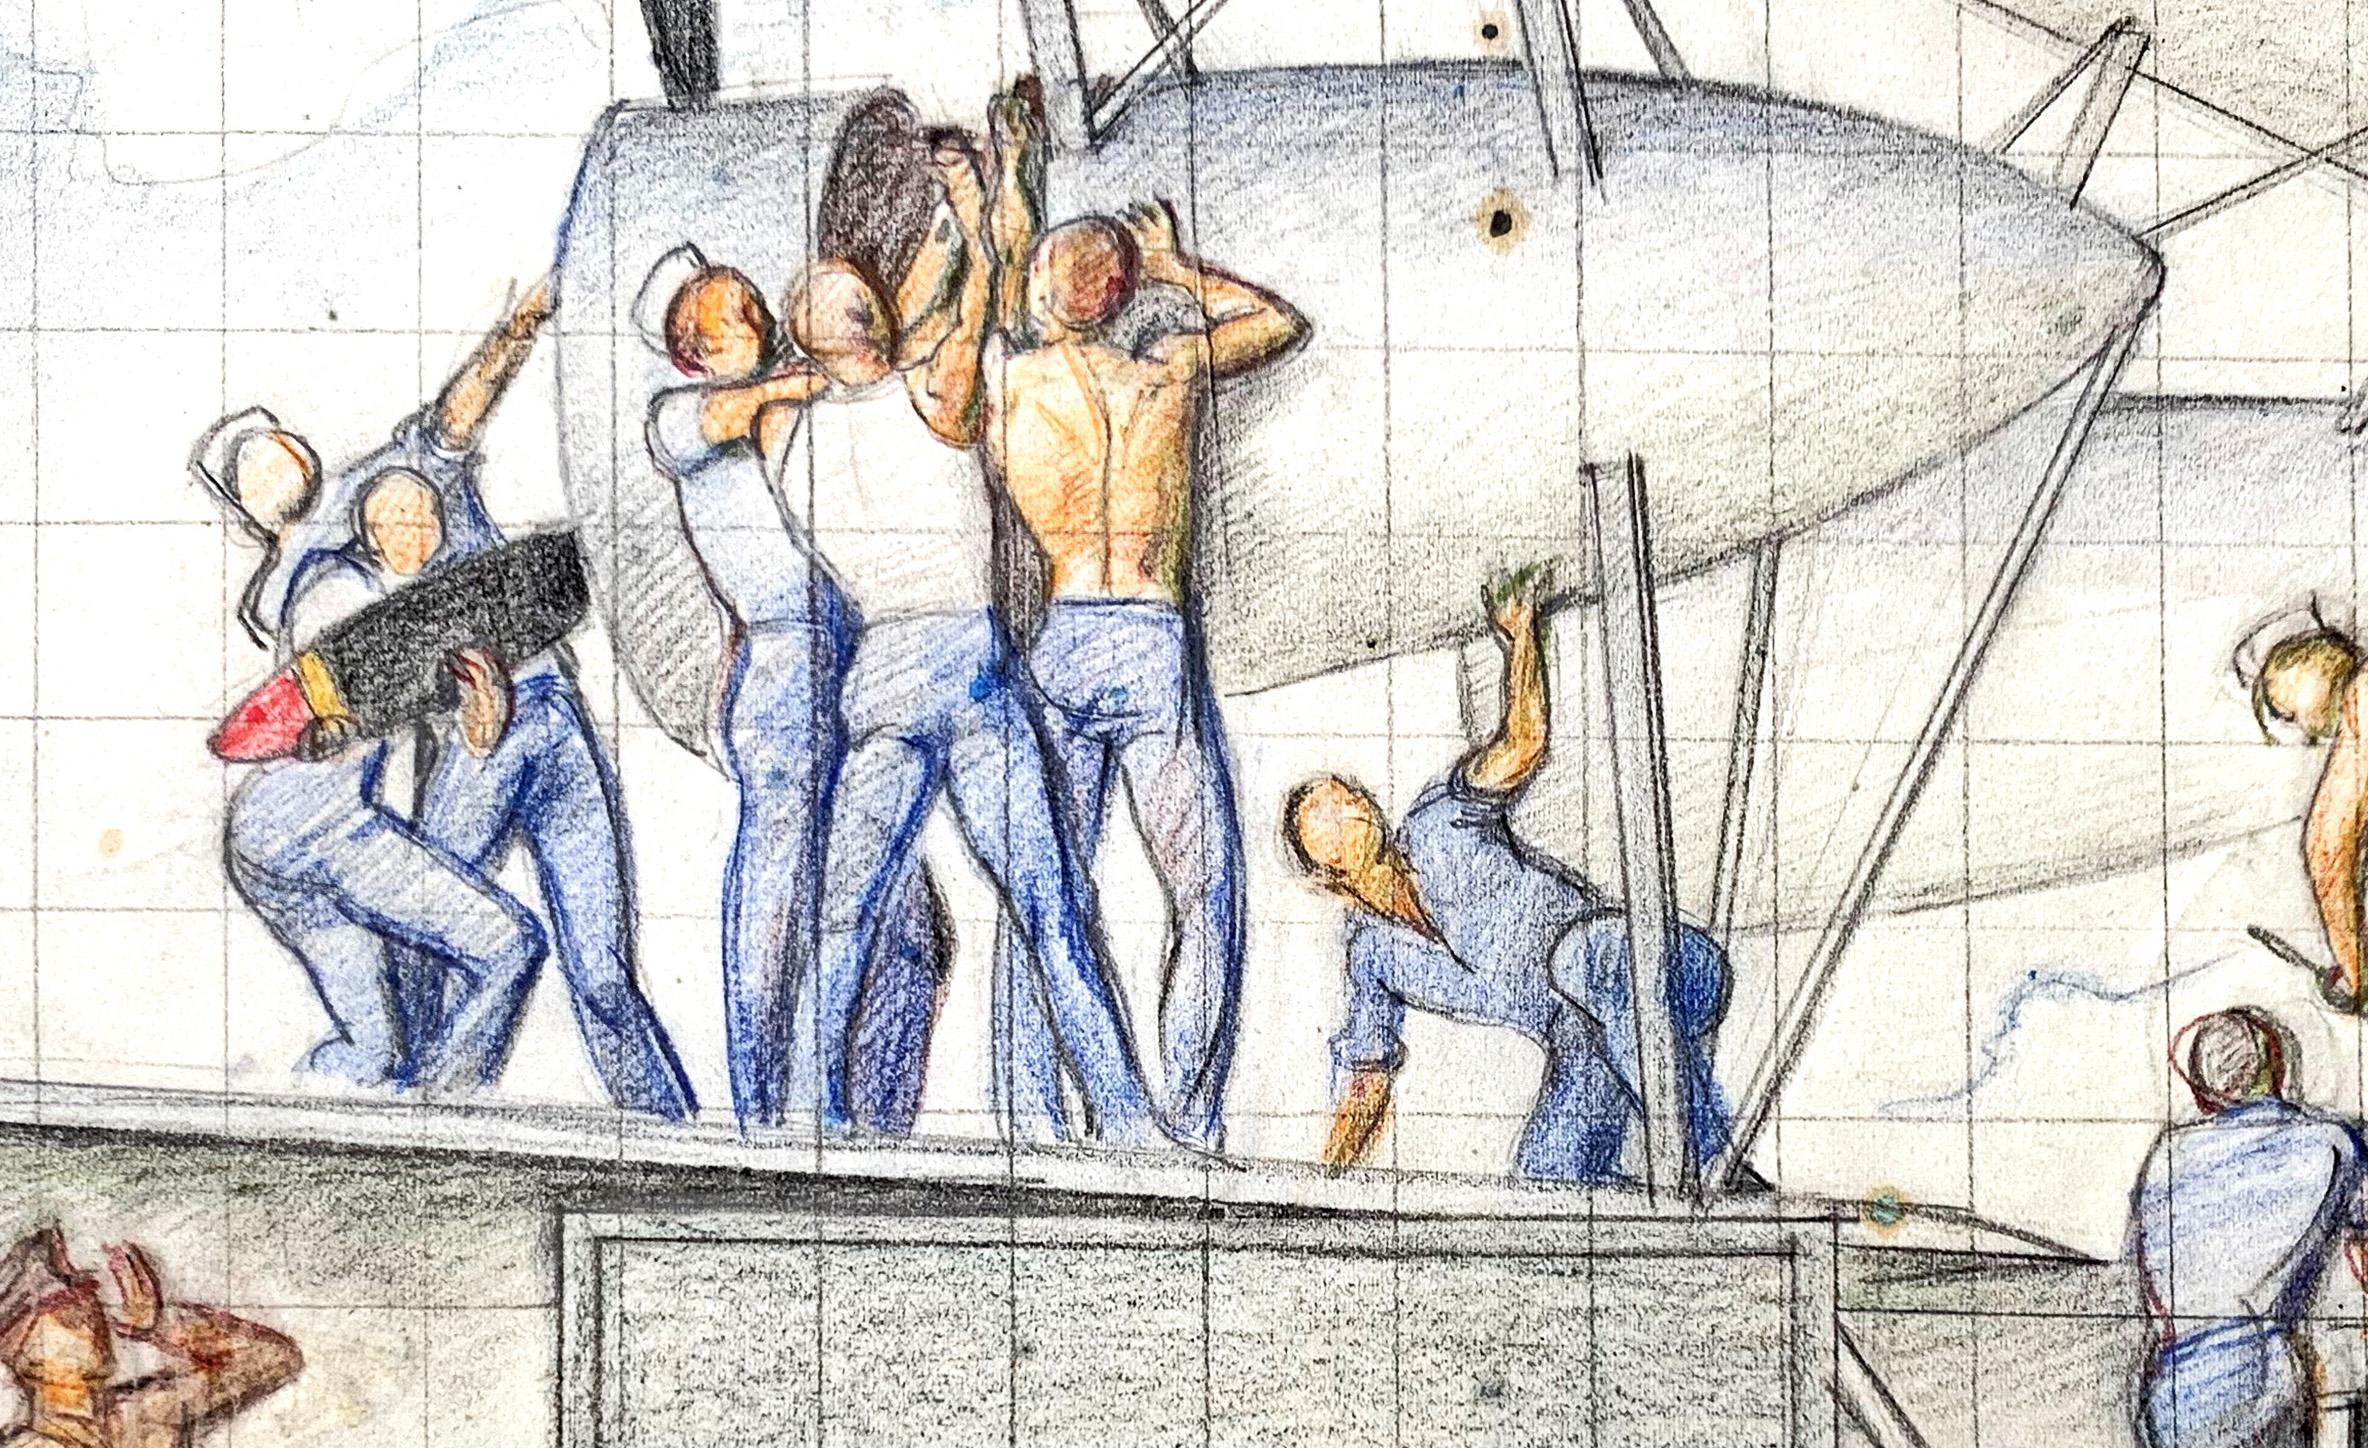 Best known for a series of murals for the U.S. Capitol Building, the artist Allyn COX also proposed murals for other buildings, and this study is an excellent example. His drawing depicts a group of eight sailors assembling the elements of a Navy